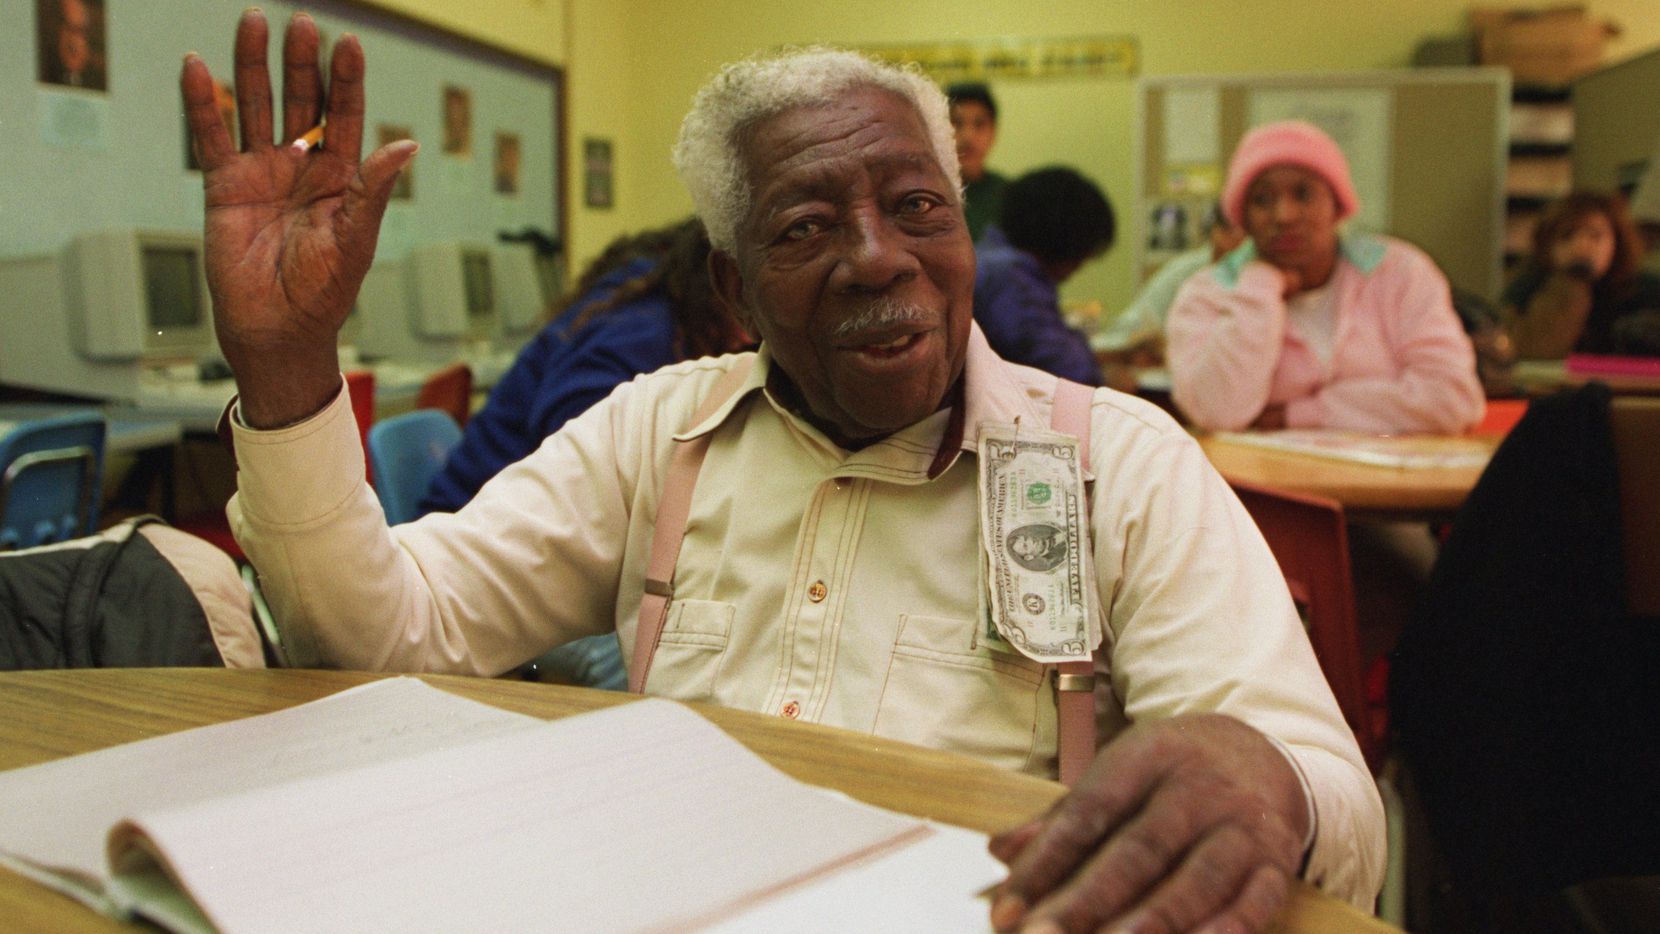 Then-98-year-old George Dawson gestures after receiving much attention during class before...